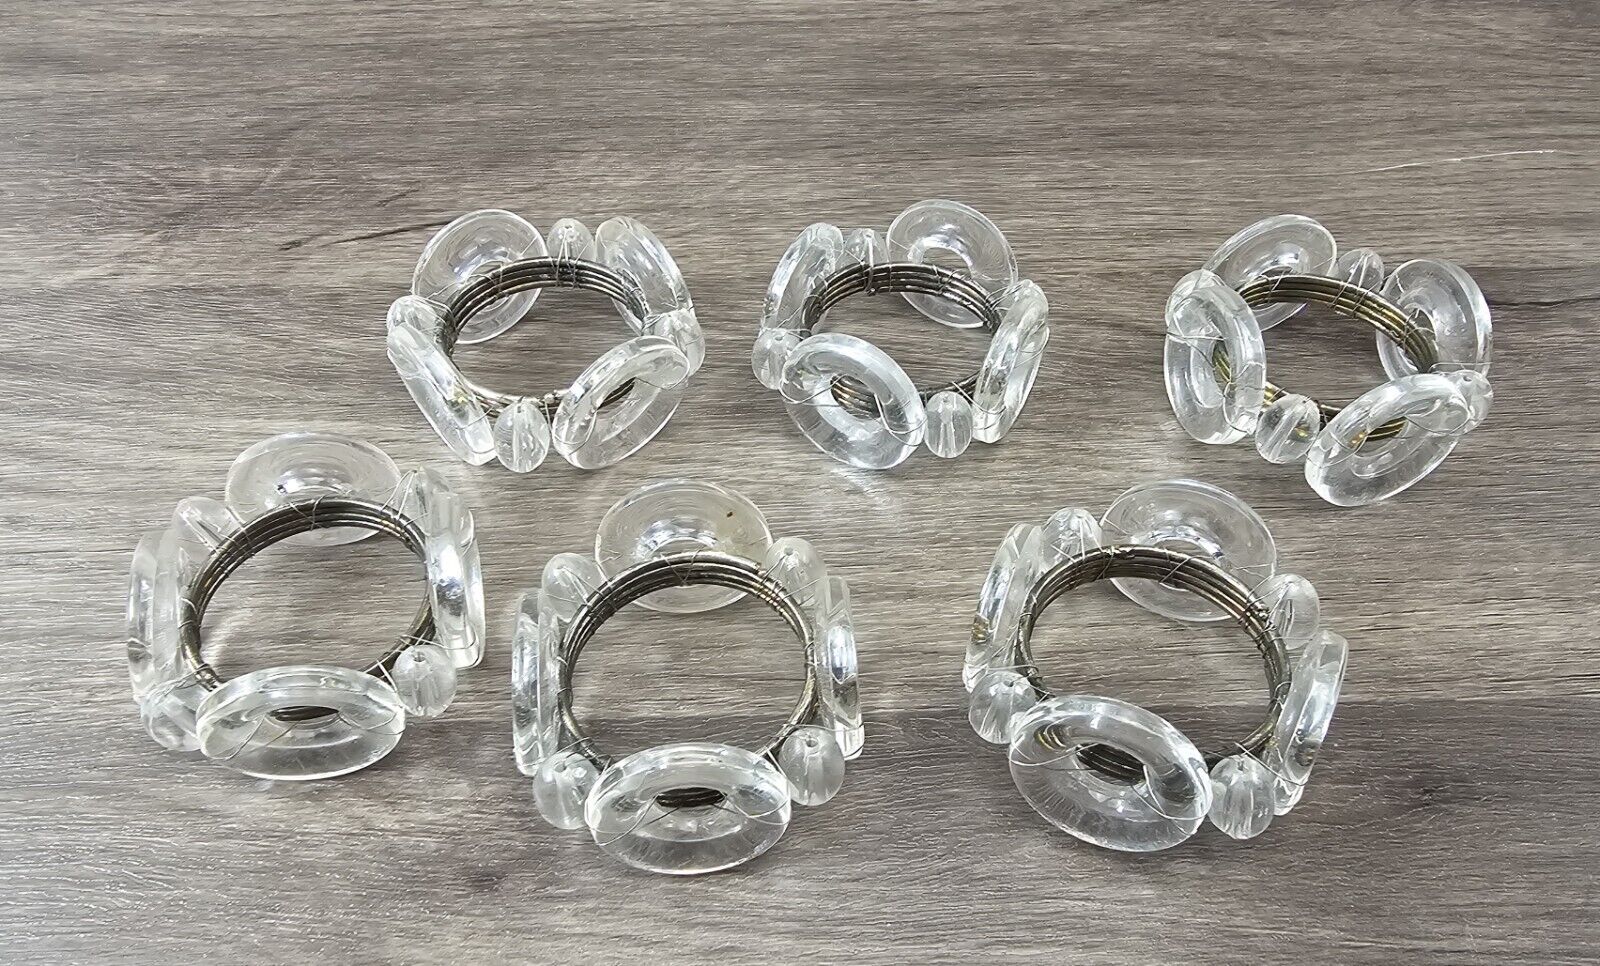 Vintage clear acrylic multi-ring napkin rings set of 6